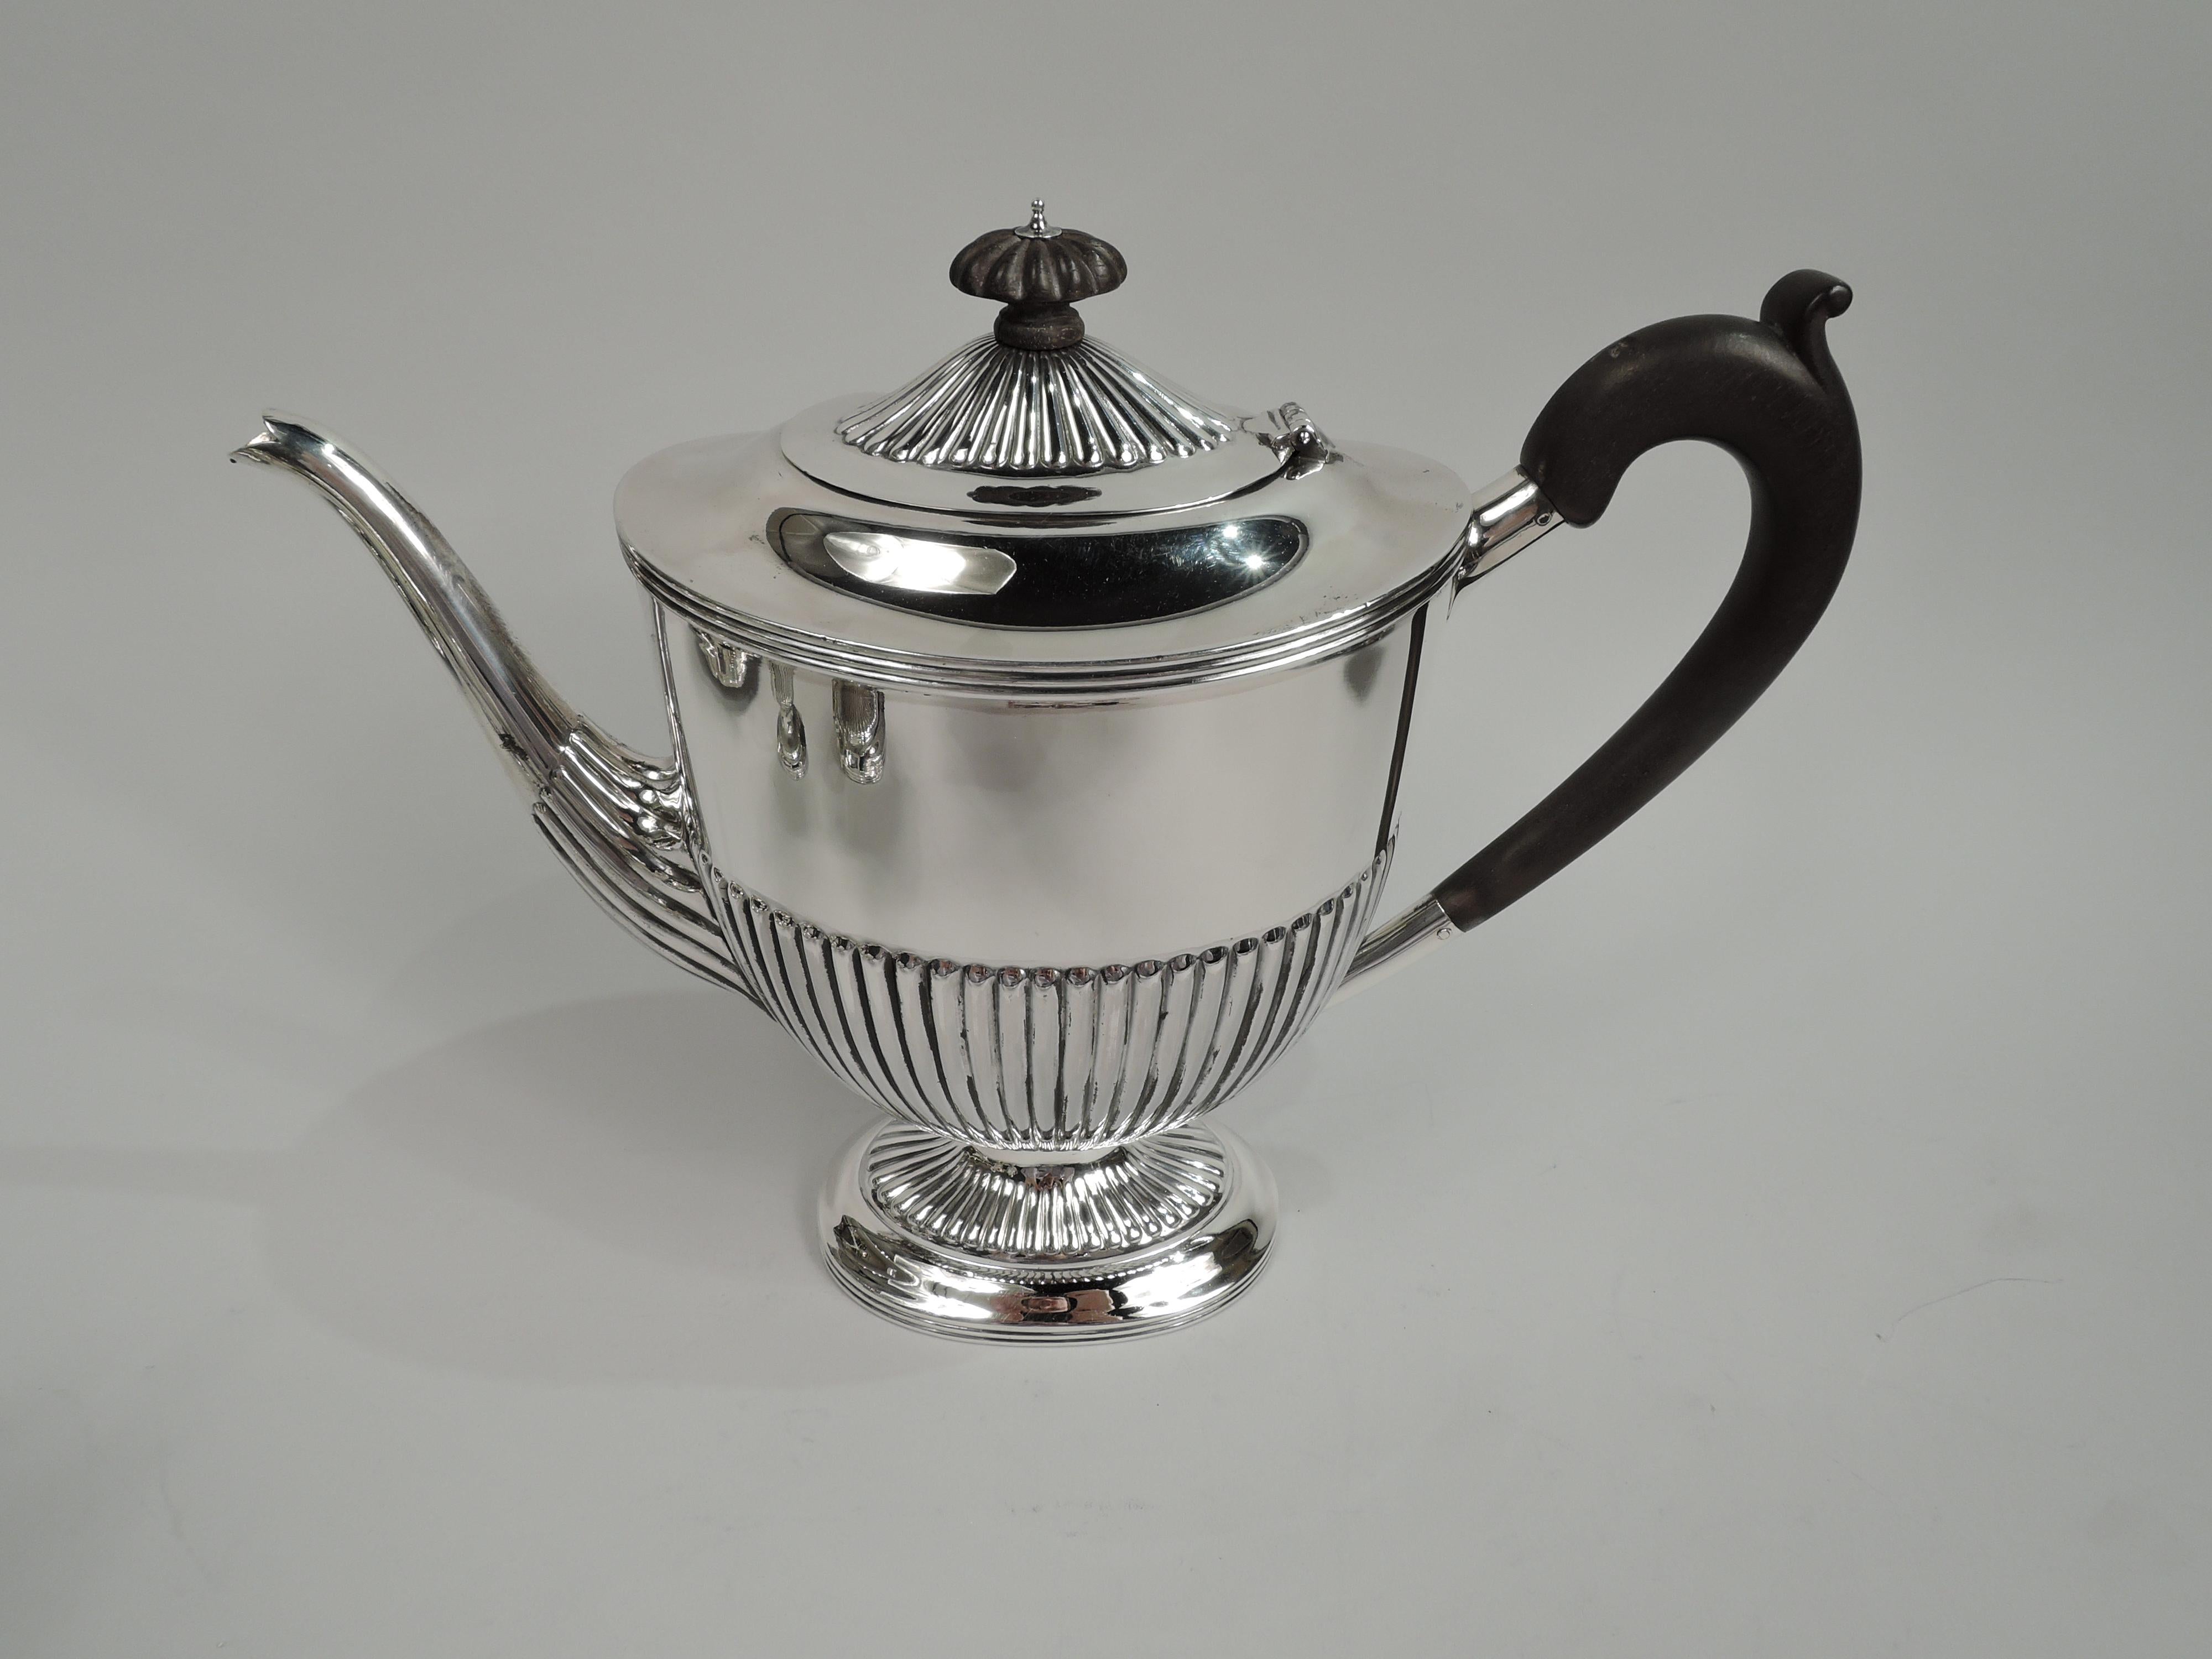 Neoclassical Revival Gorham Victorian Neoclassical Sterling Silver 3-Piece Coffee Set